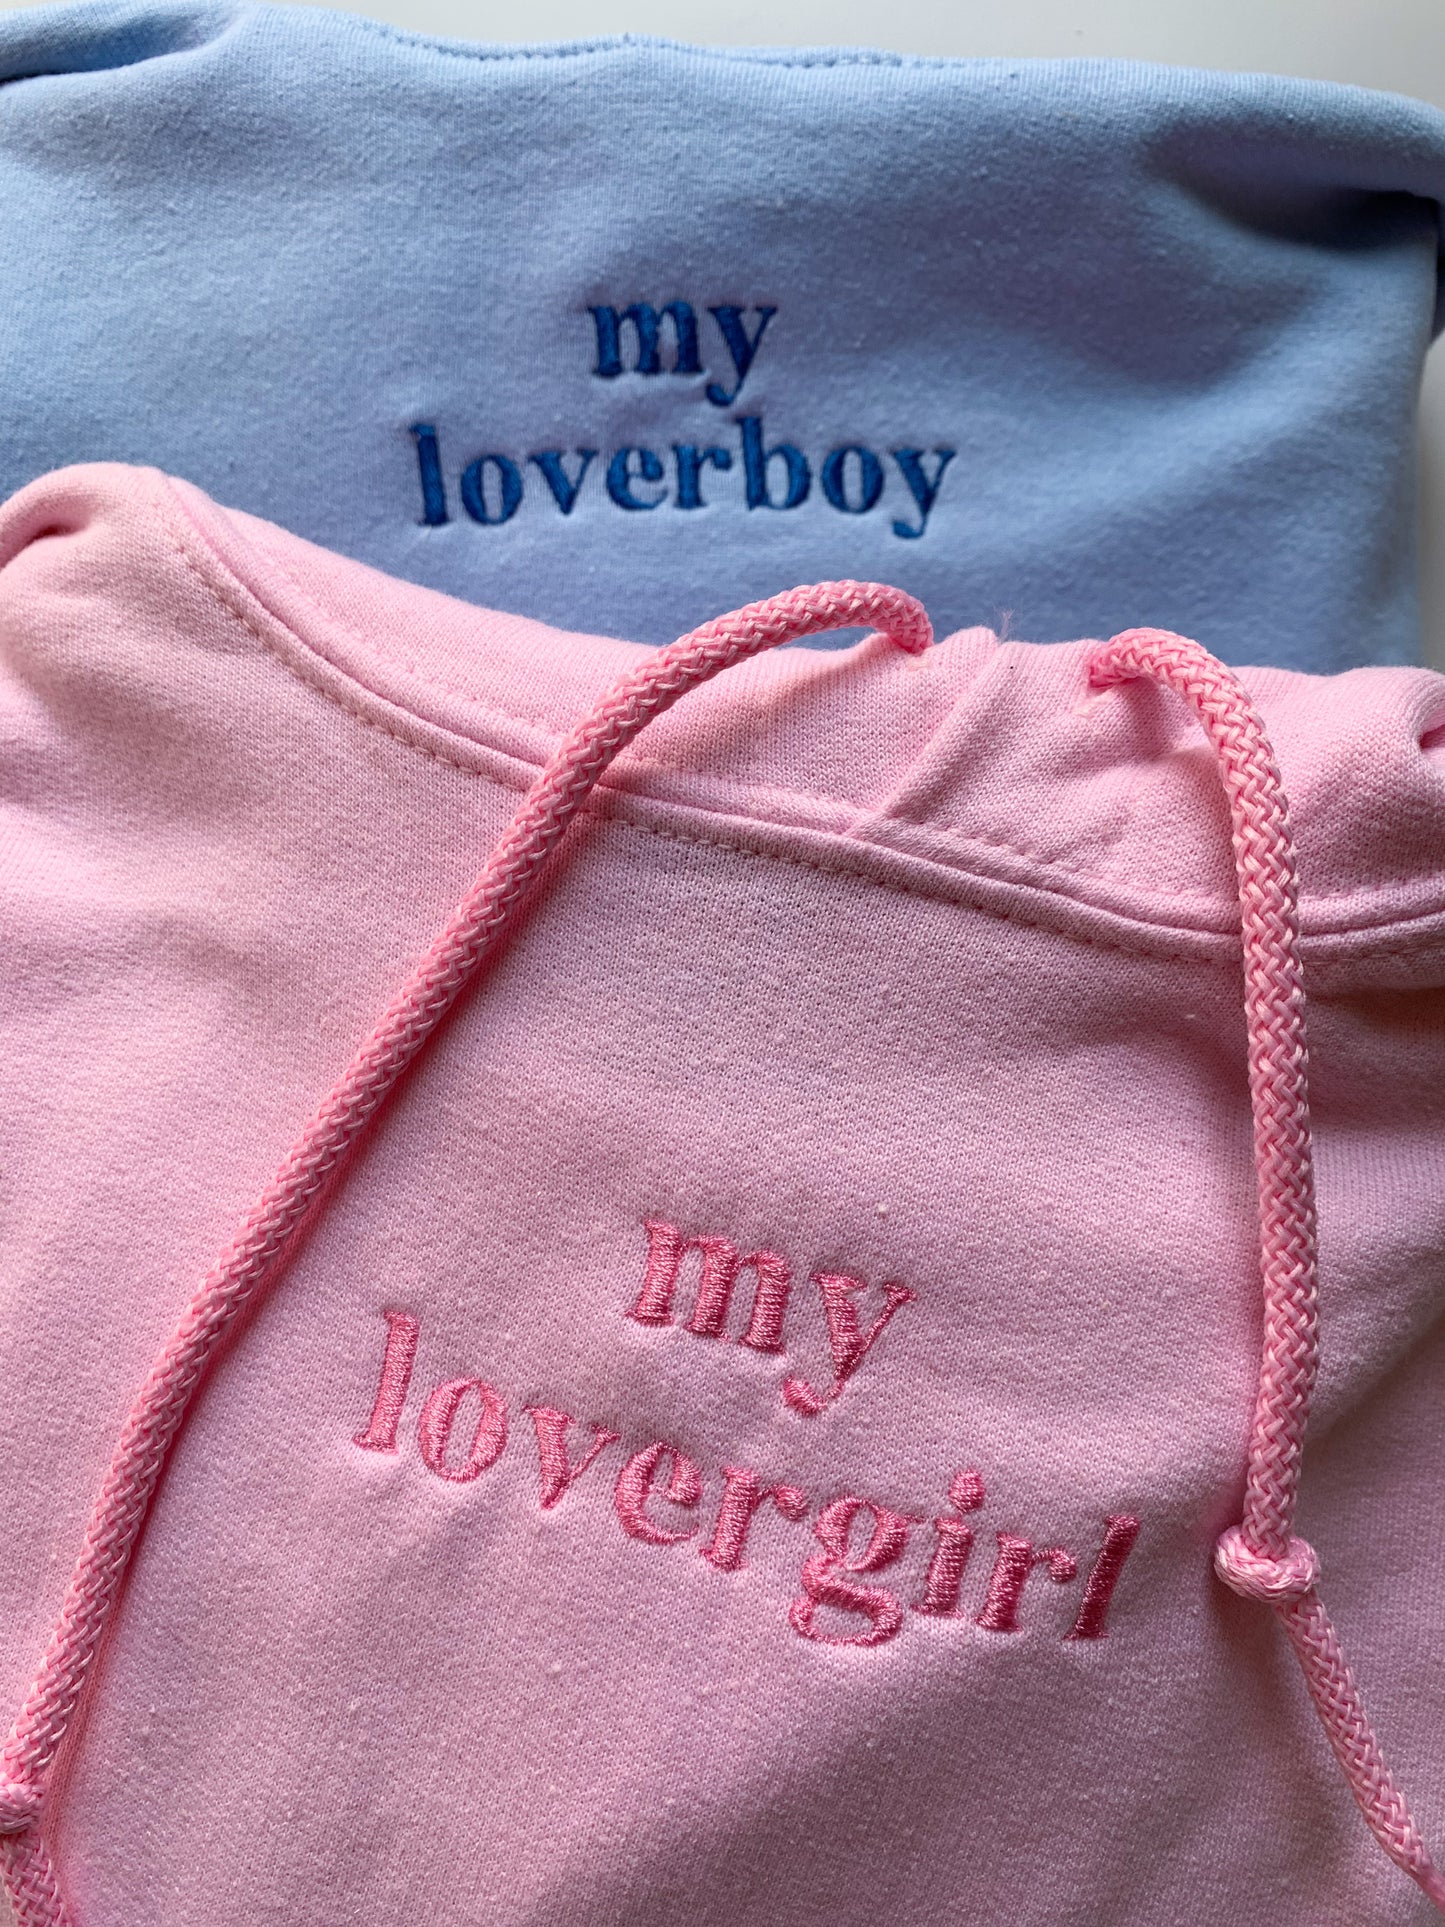 "My Loverboy" Embroidery